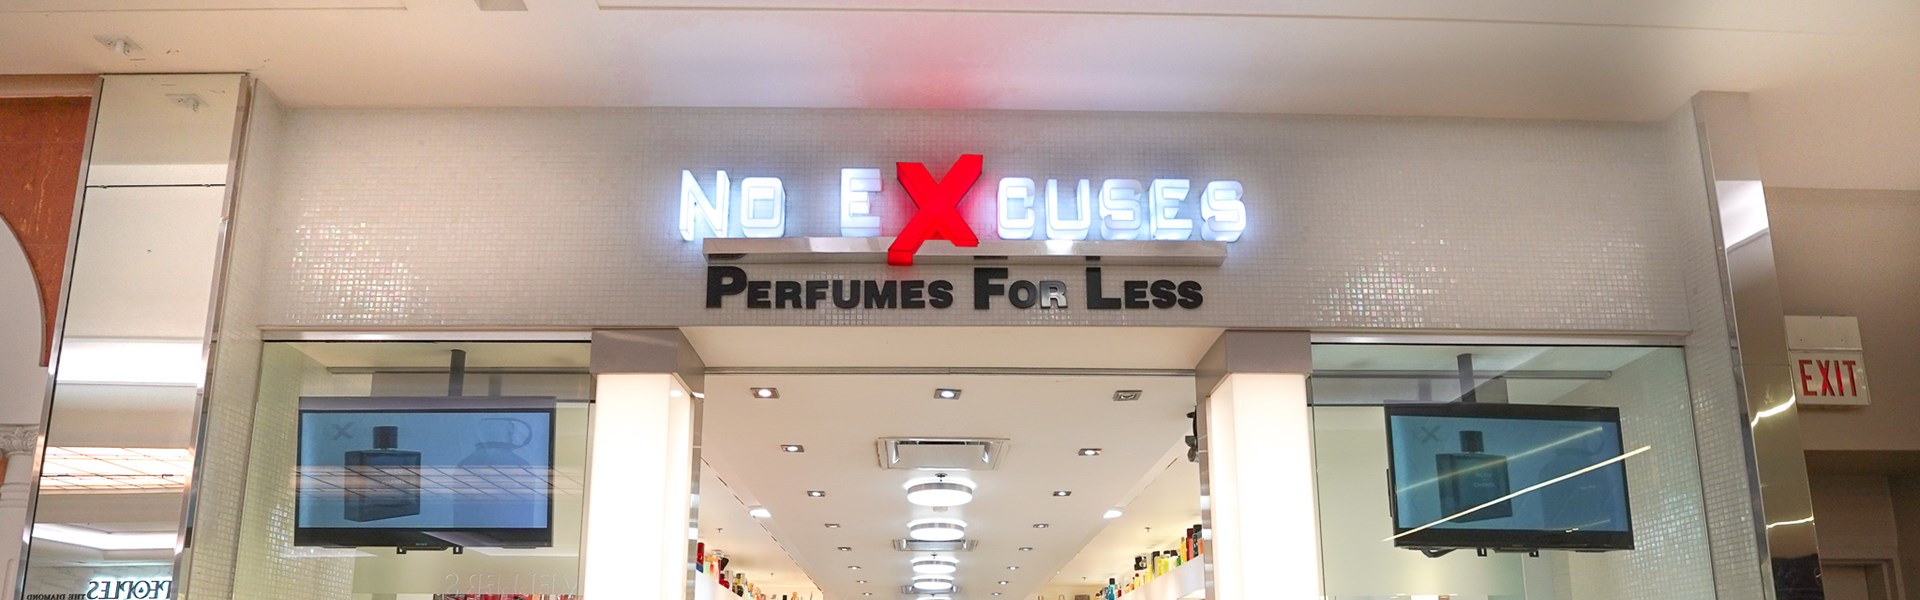 No Excuses - Perfumes For Less